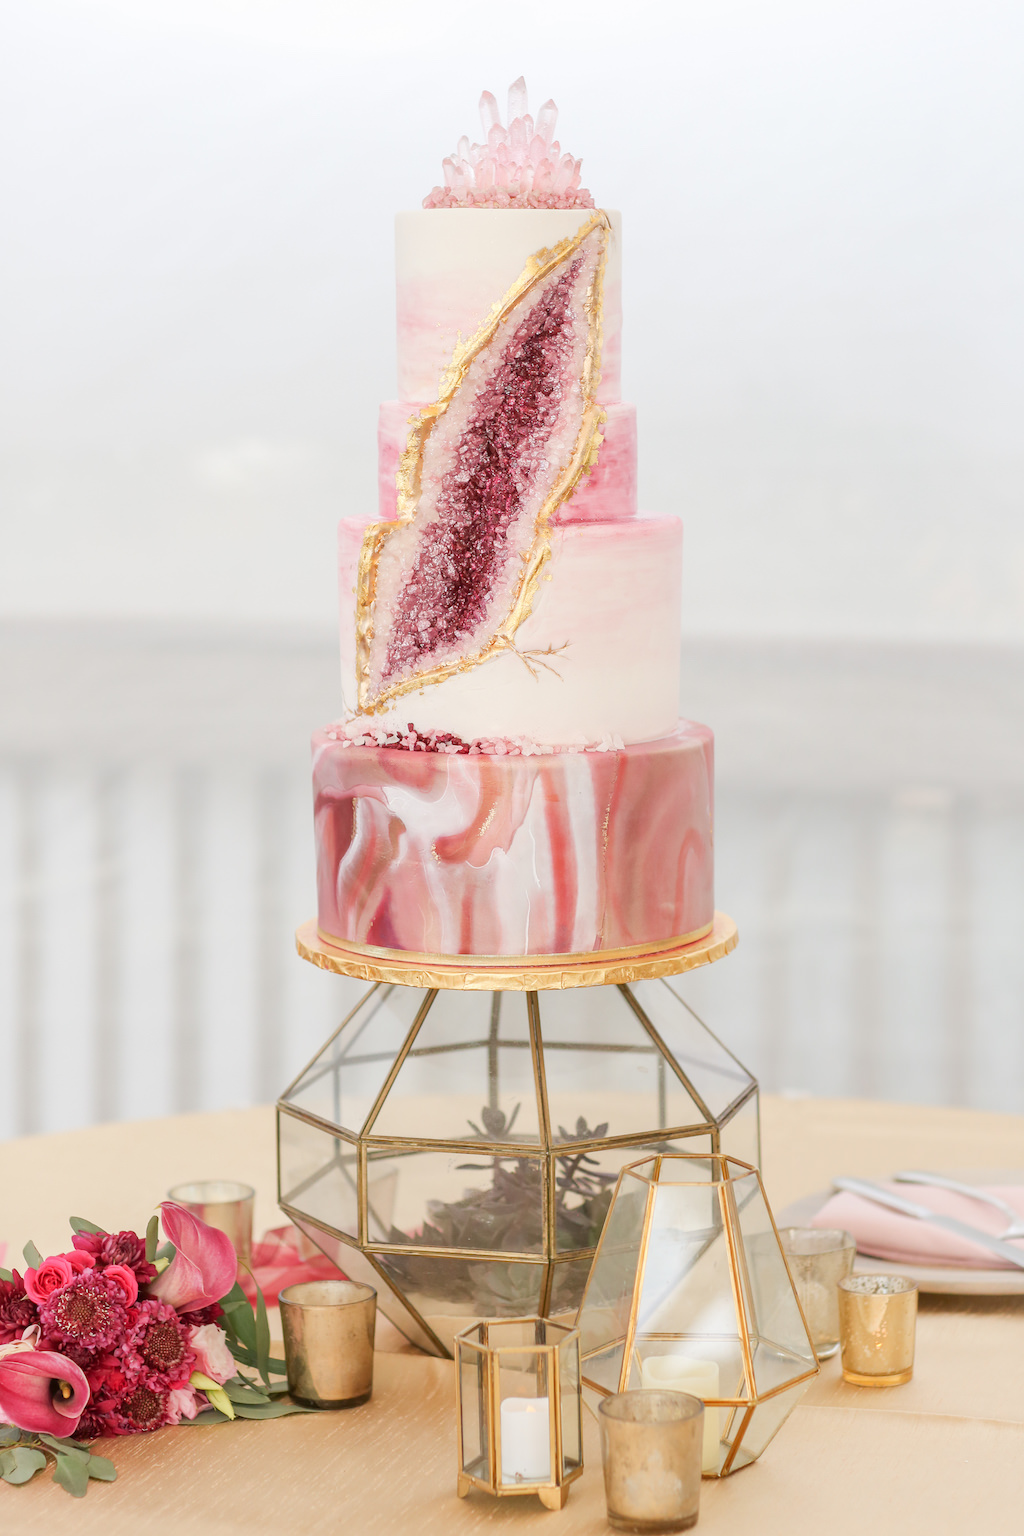 Four Tier Pink Marble, Gold and Purple Geode Crystal Wedding Cake with Rose Quartz Crystal Cake Topper on Geometric Vase Cake Stand | Tampa Bay Wedding Photographer Lifelong Photography Studios | Wedding Cake and Bakery The Artistic Whisk